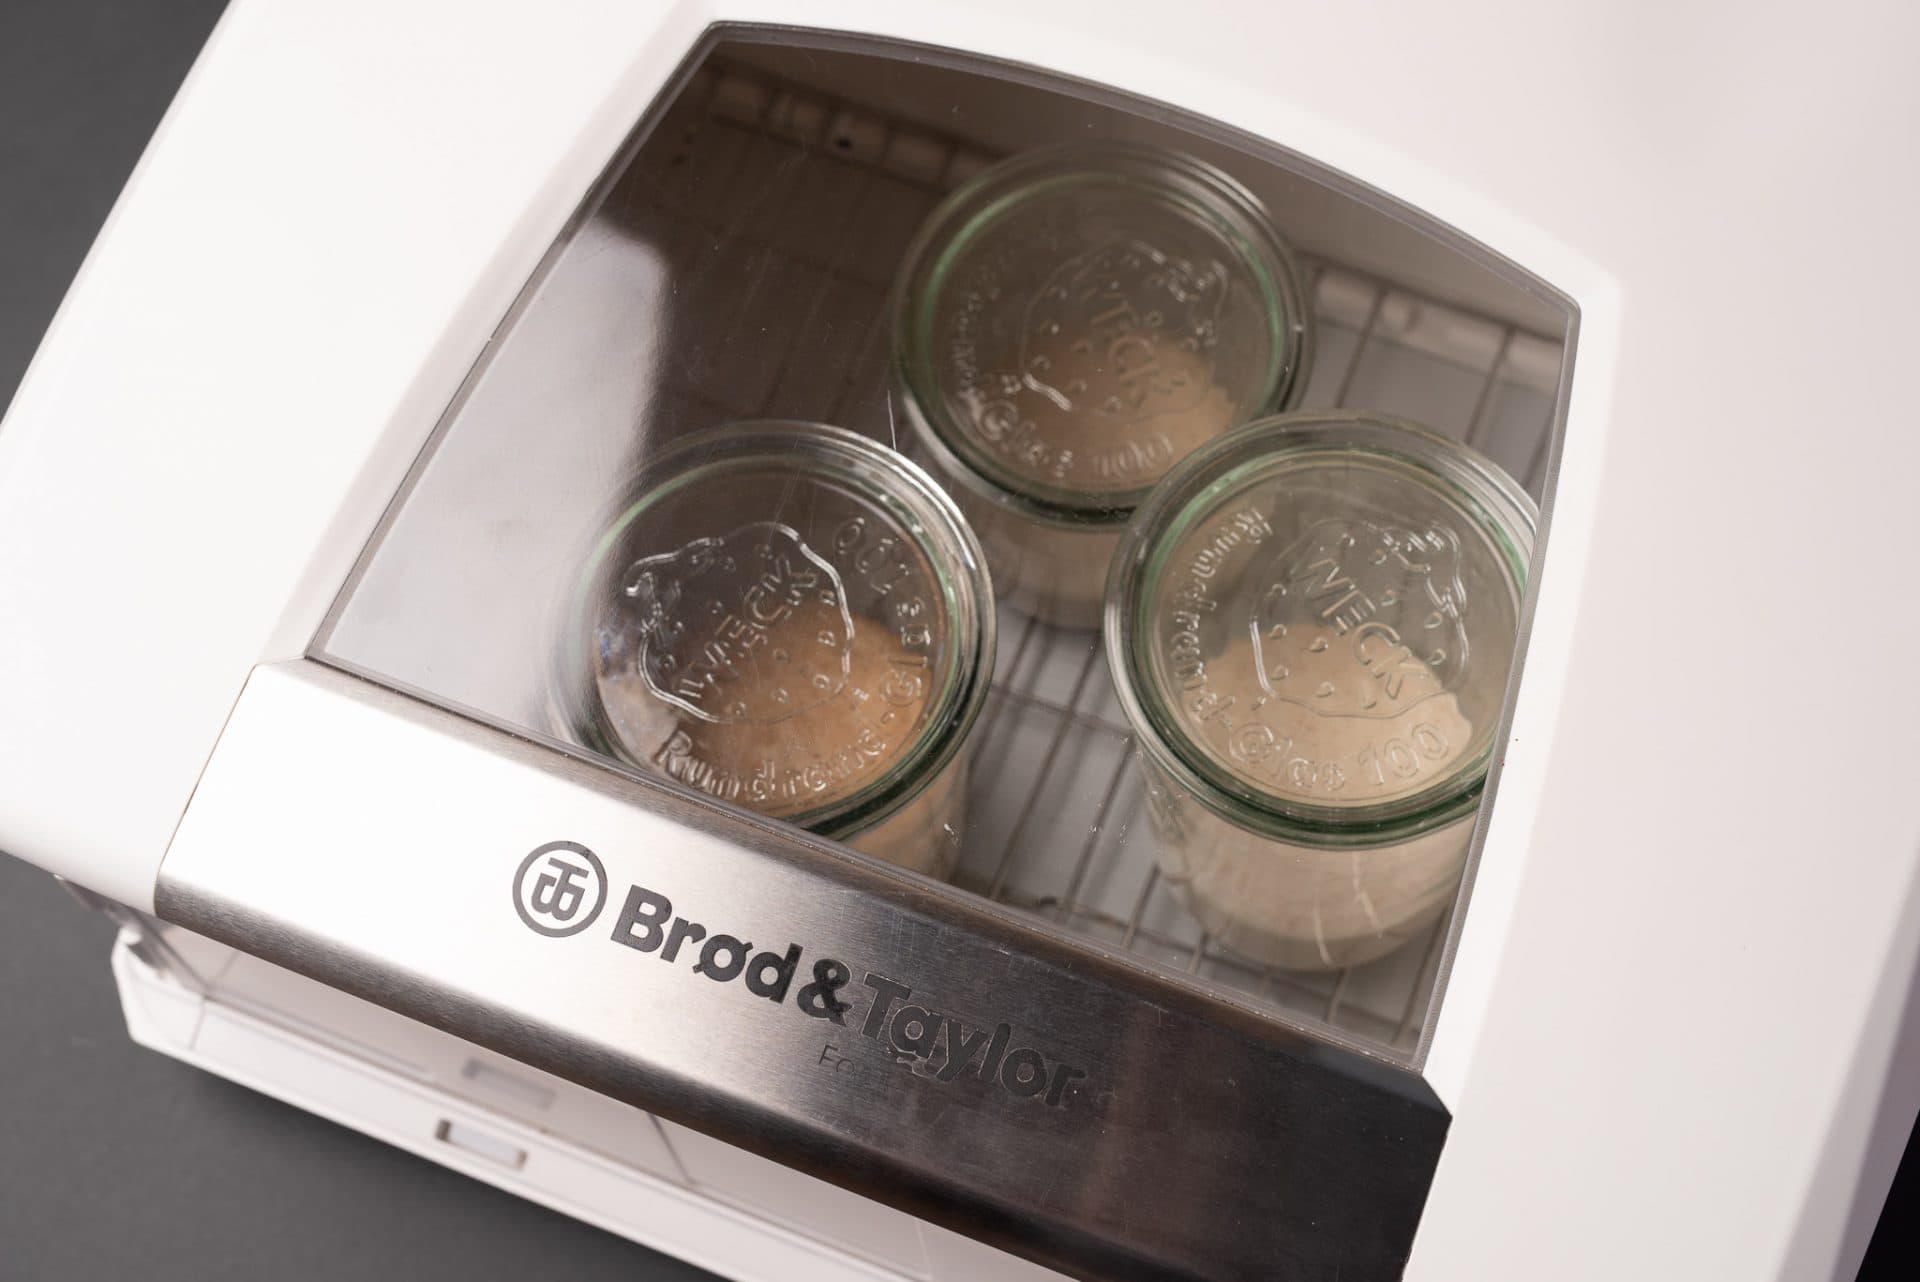 How to use the brod and taylor dough proofer